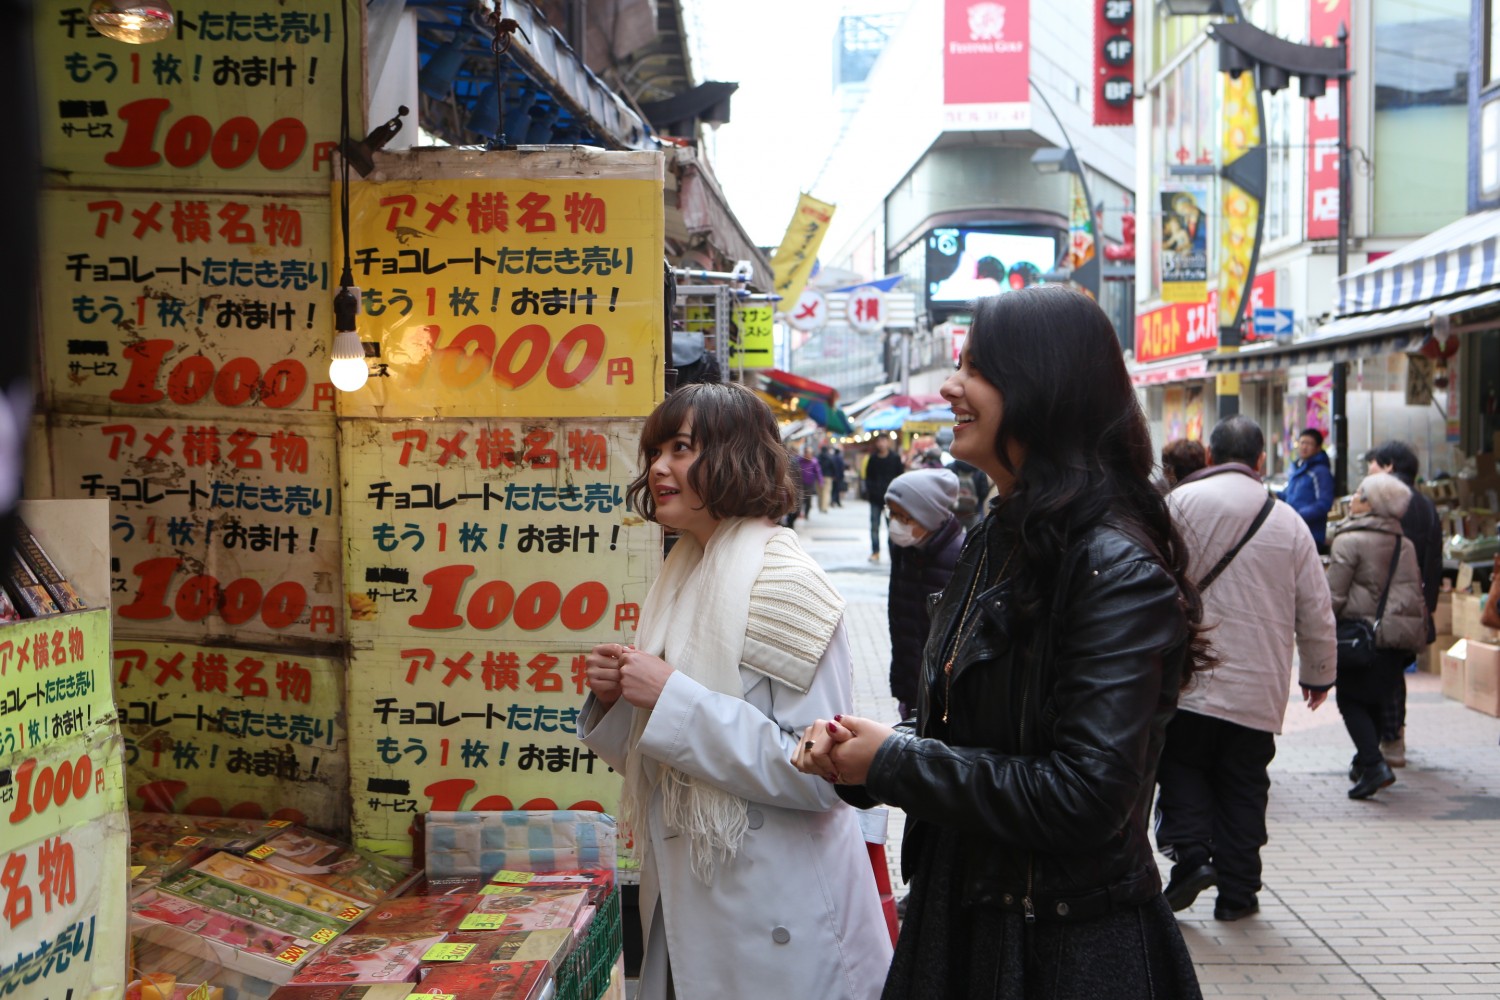 Pick Up Some Great Bargains for Speciality Goods at Ueno’s Biggest Market “Ame Yoko”!